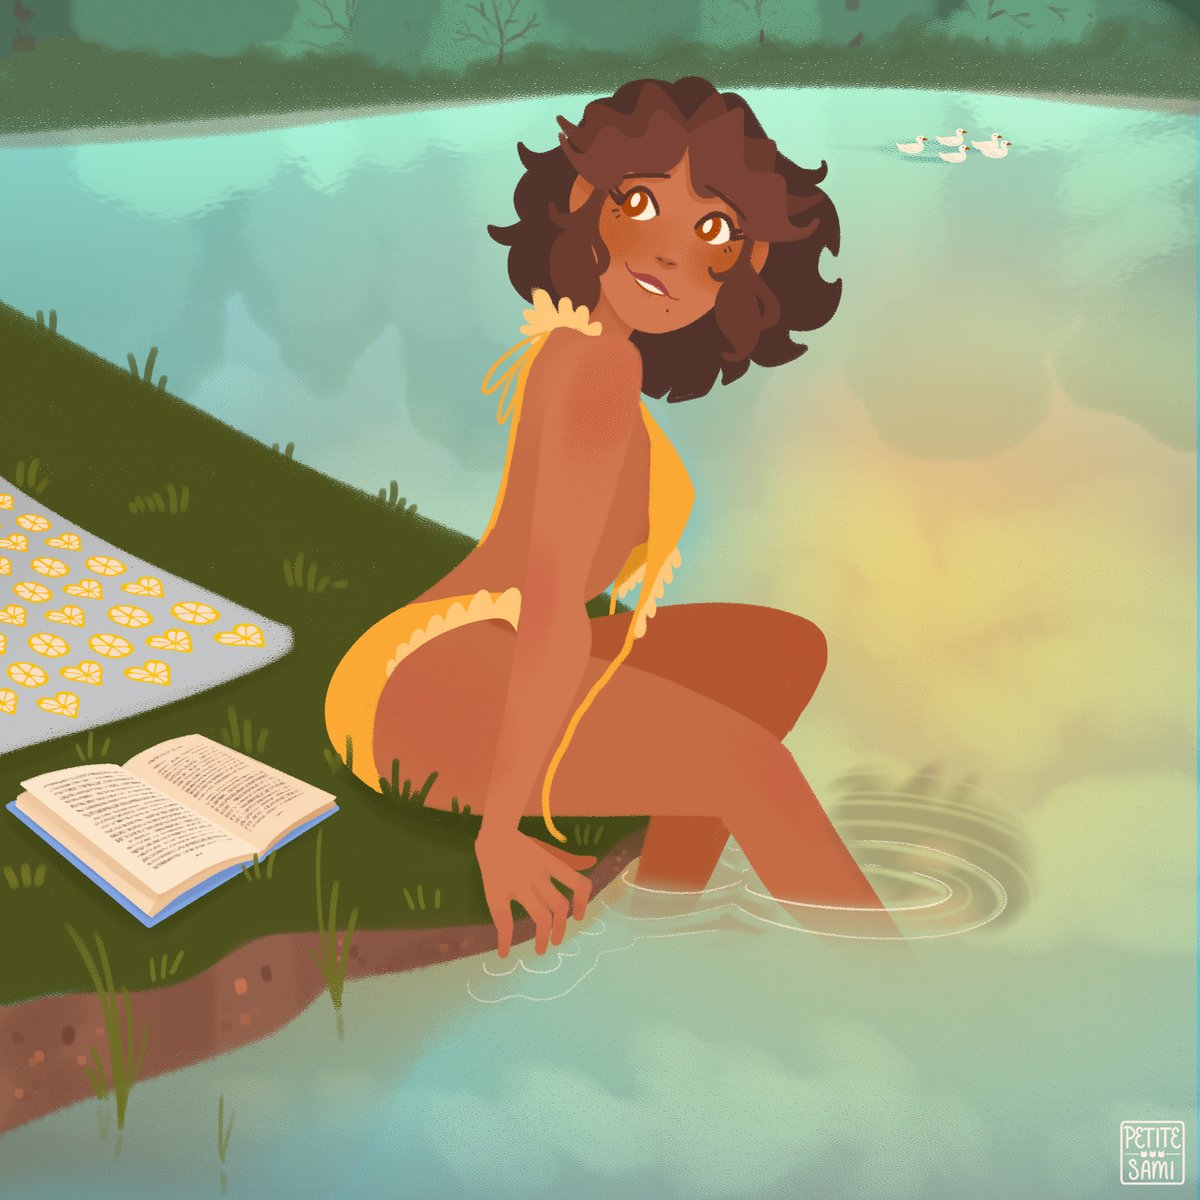 Going in for a dip 💛😜 I just wanted a flirty Briar batting her eyes to off screen Grayson. & to play with the water's reflections. #RangerBriarDumont #originalcharacter #doodle #illustration #digitalart #summervibes